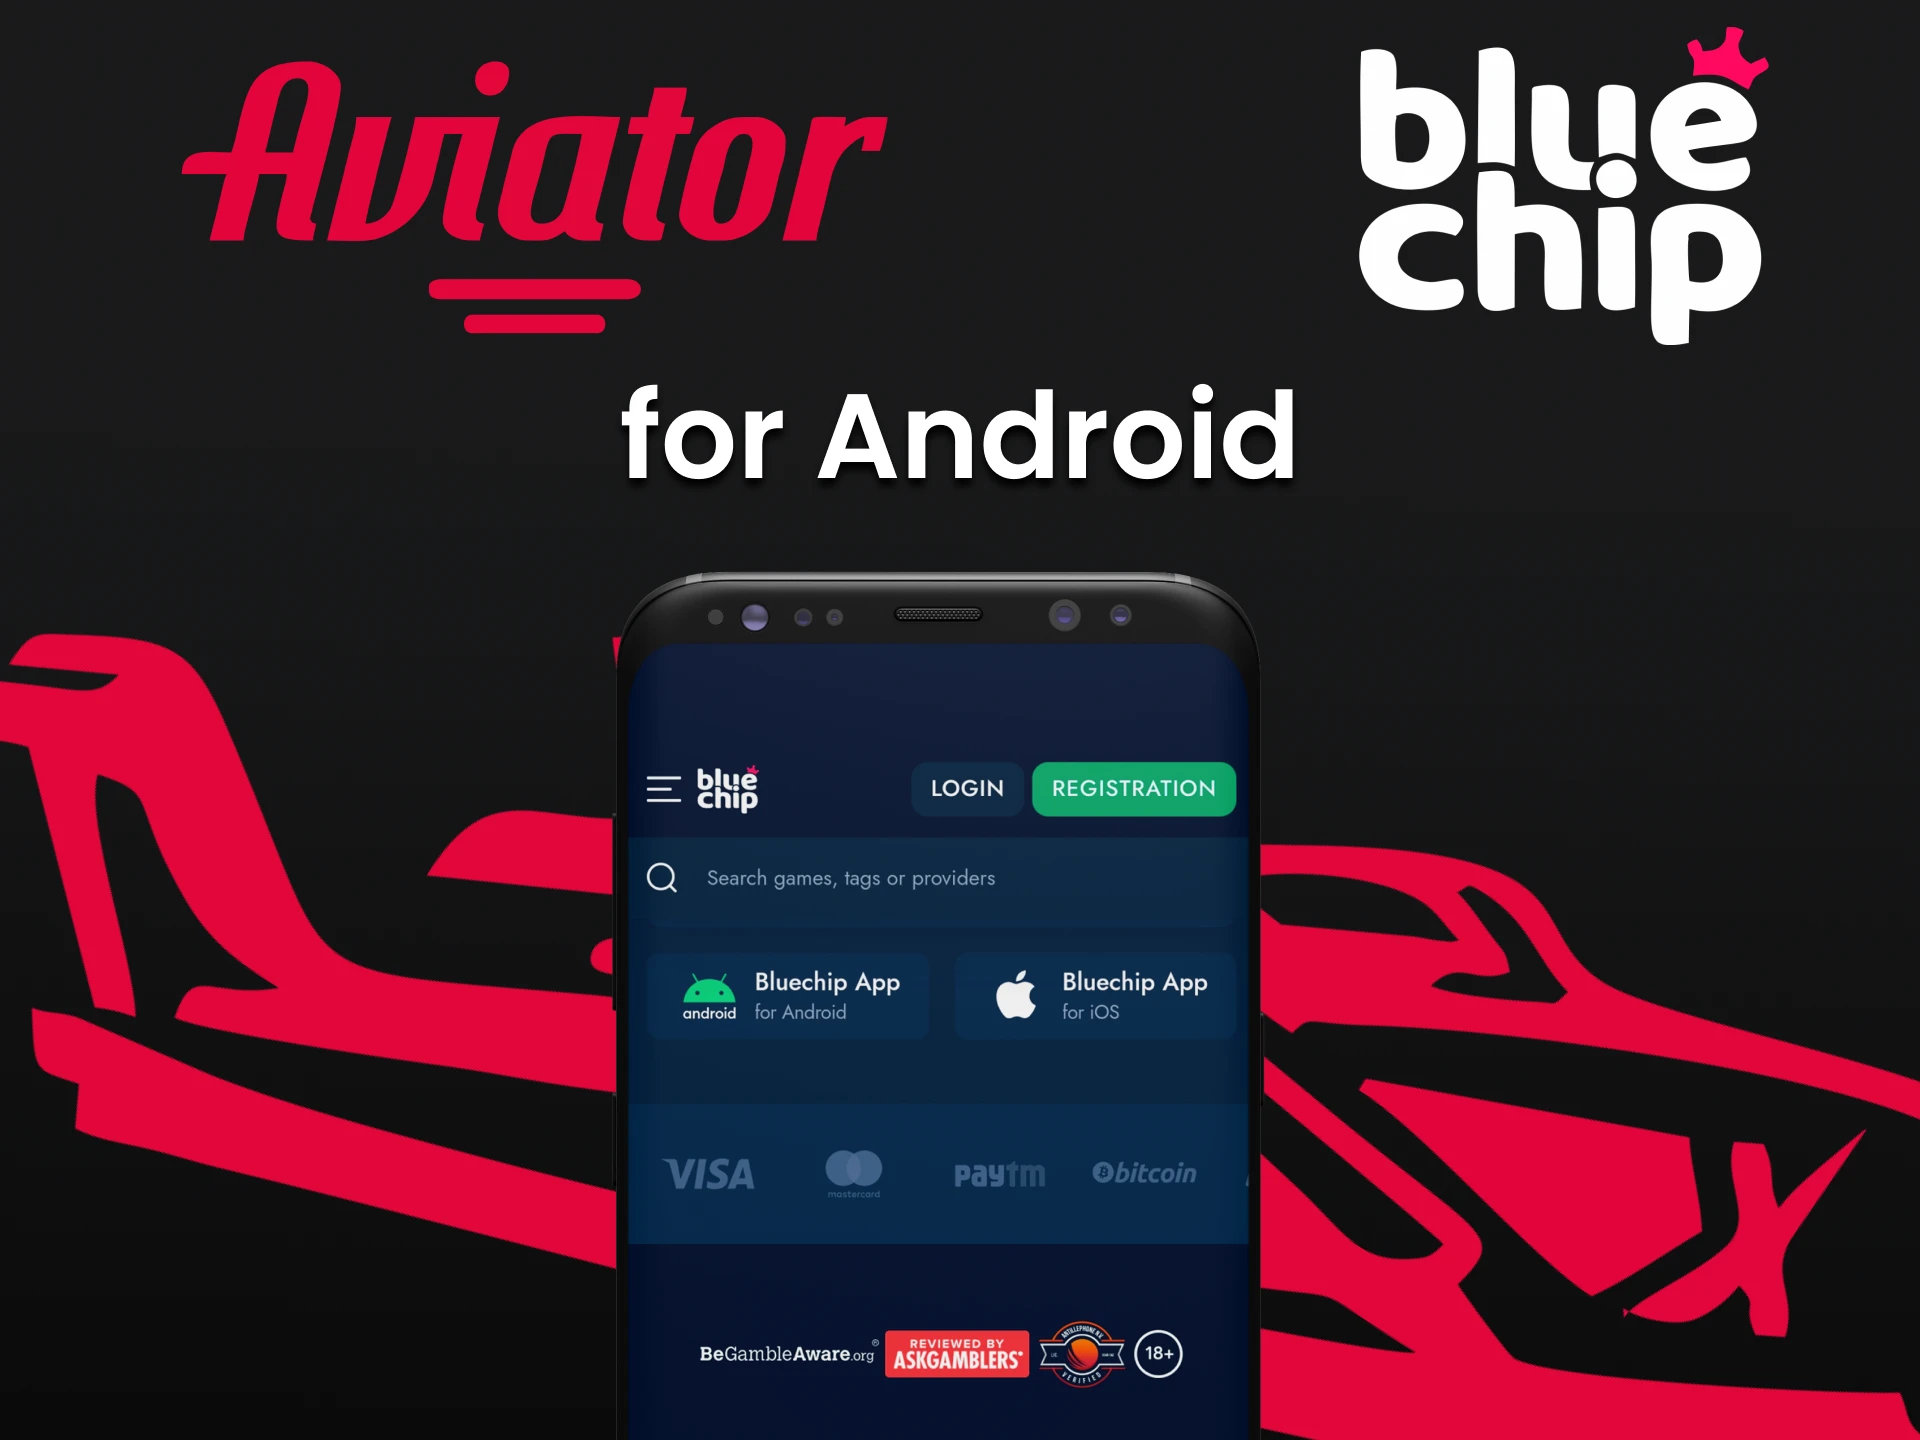 Download the app for android from Bluechip.